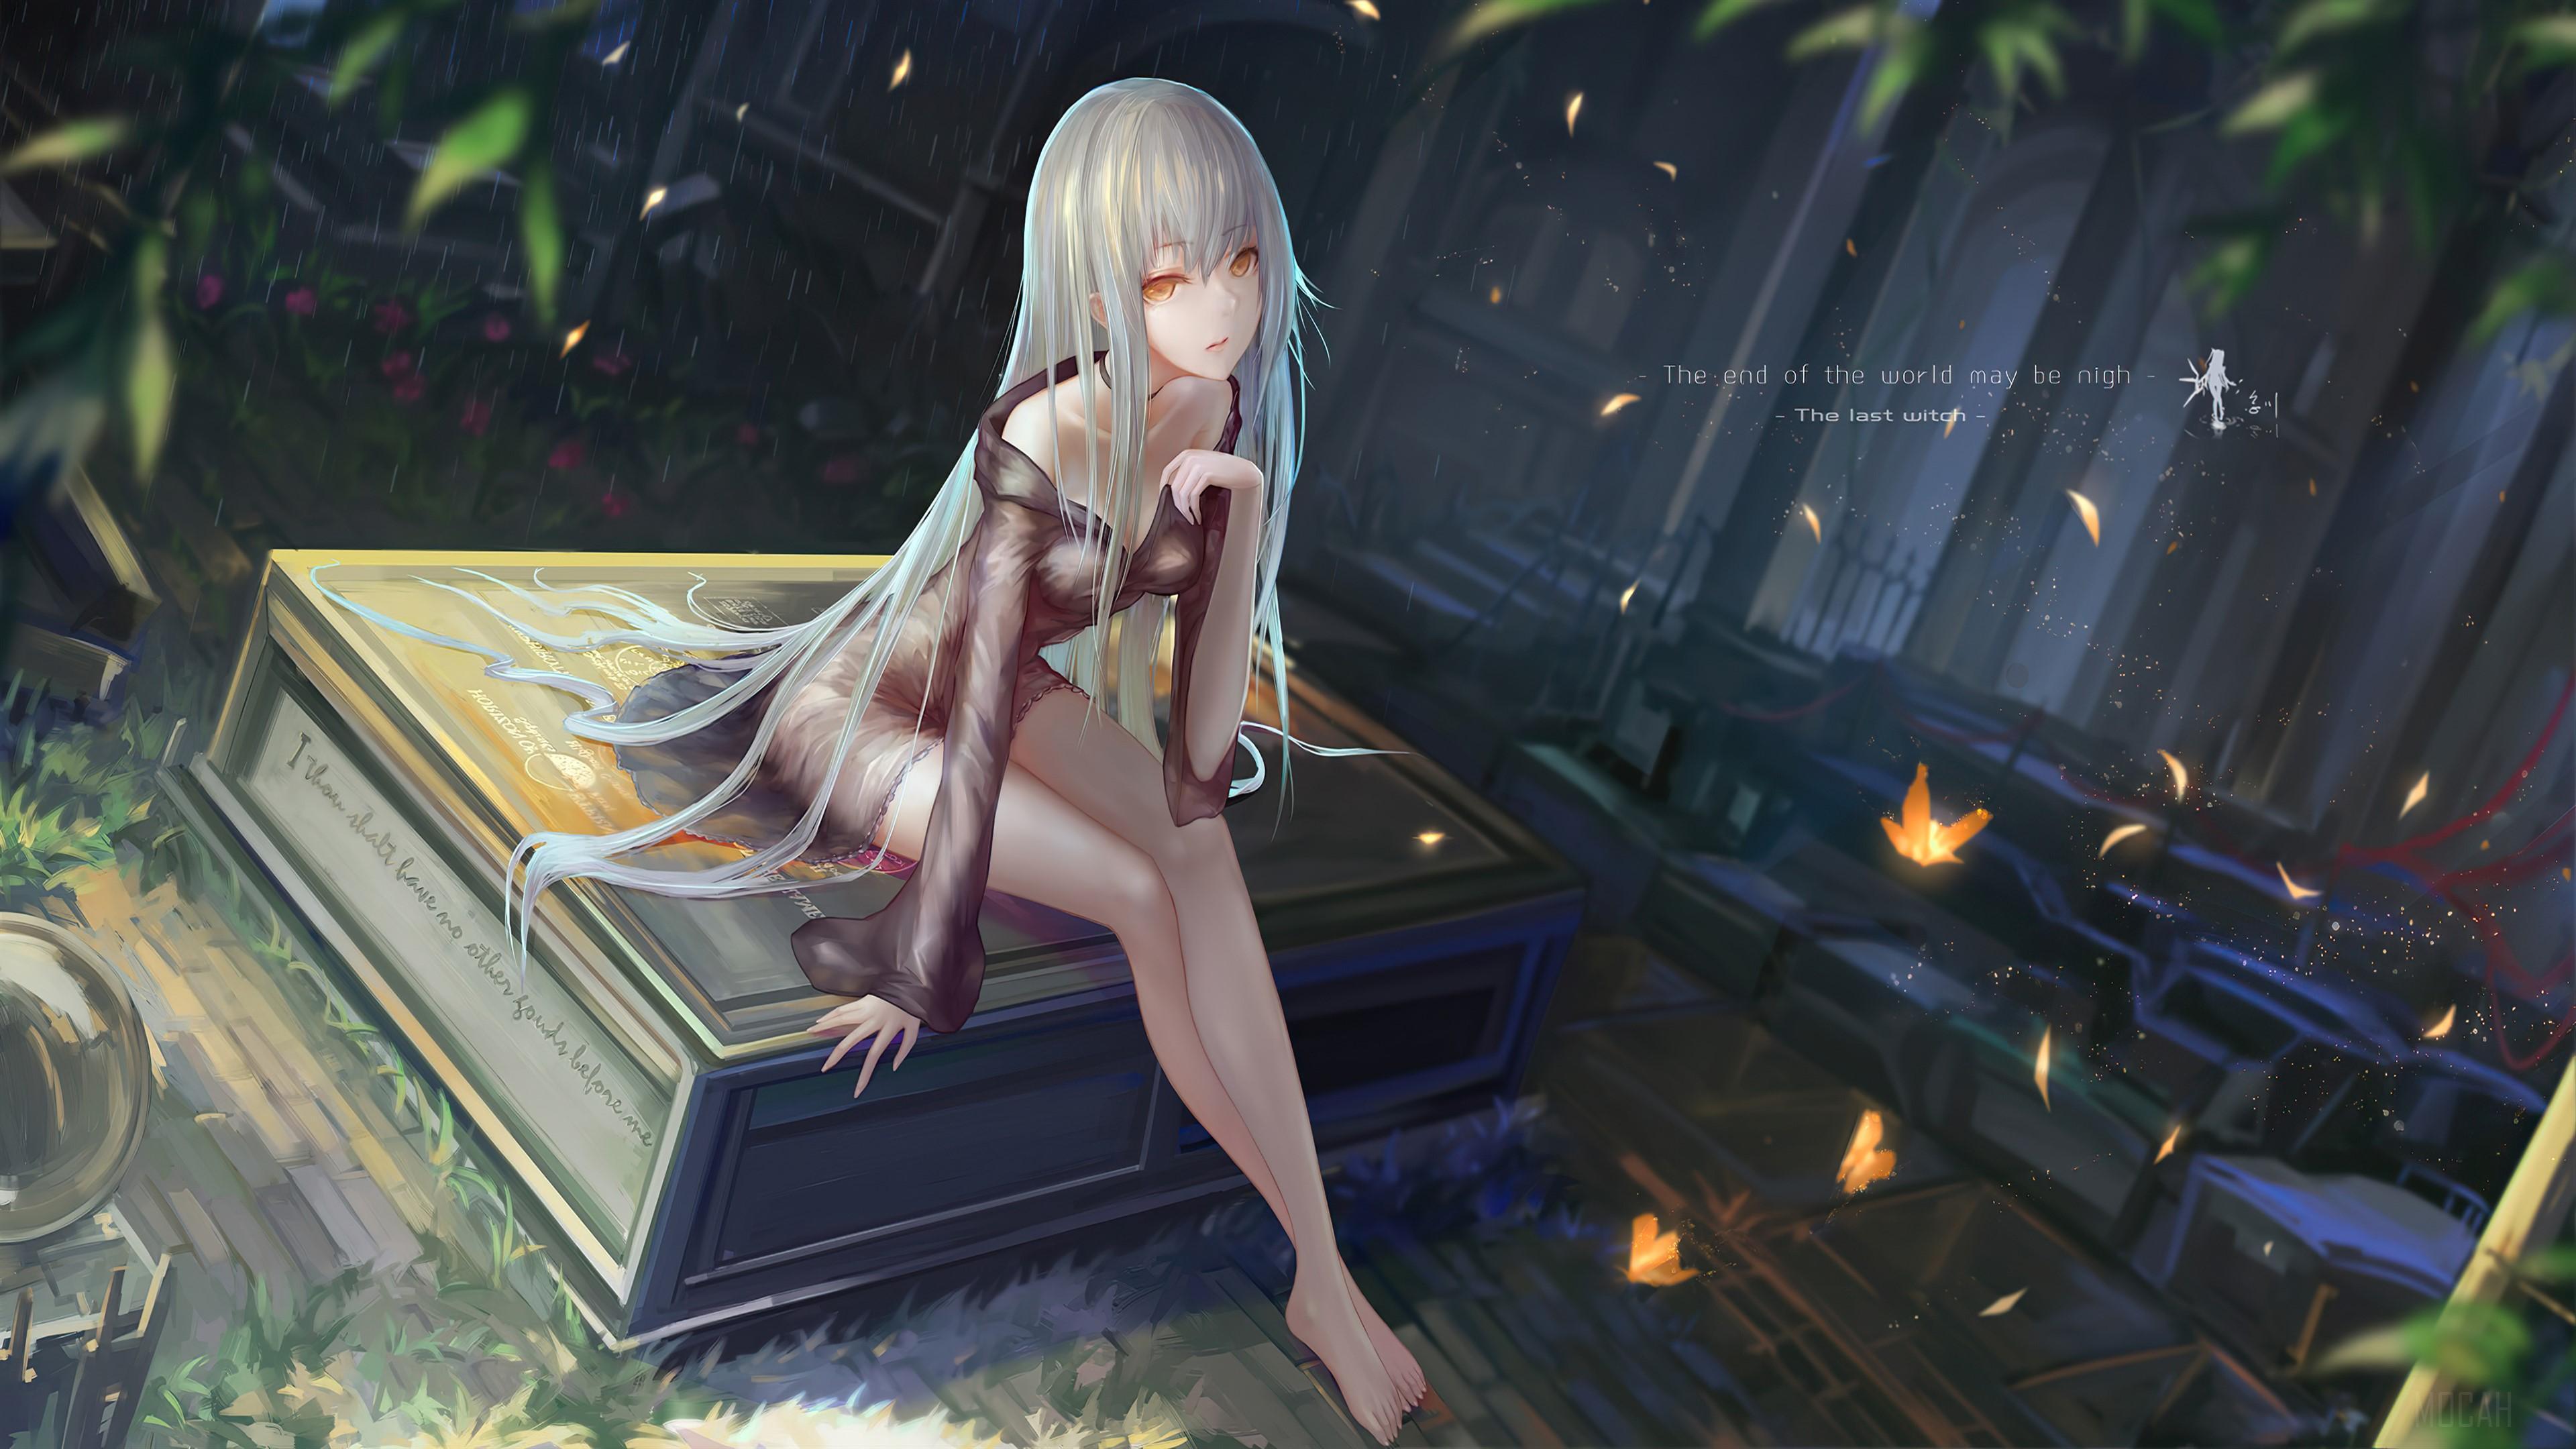 HD wallpaper, Anime Girl The Last Witch 4K